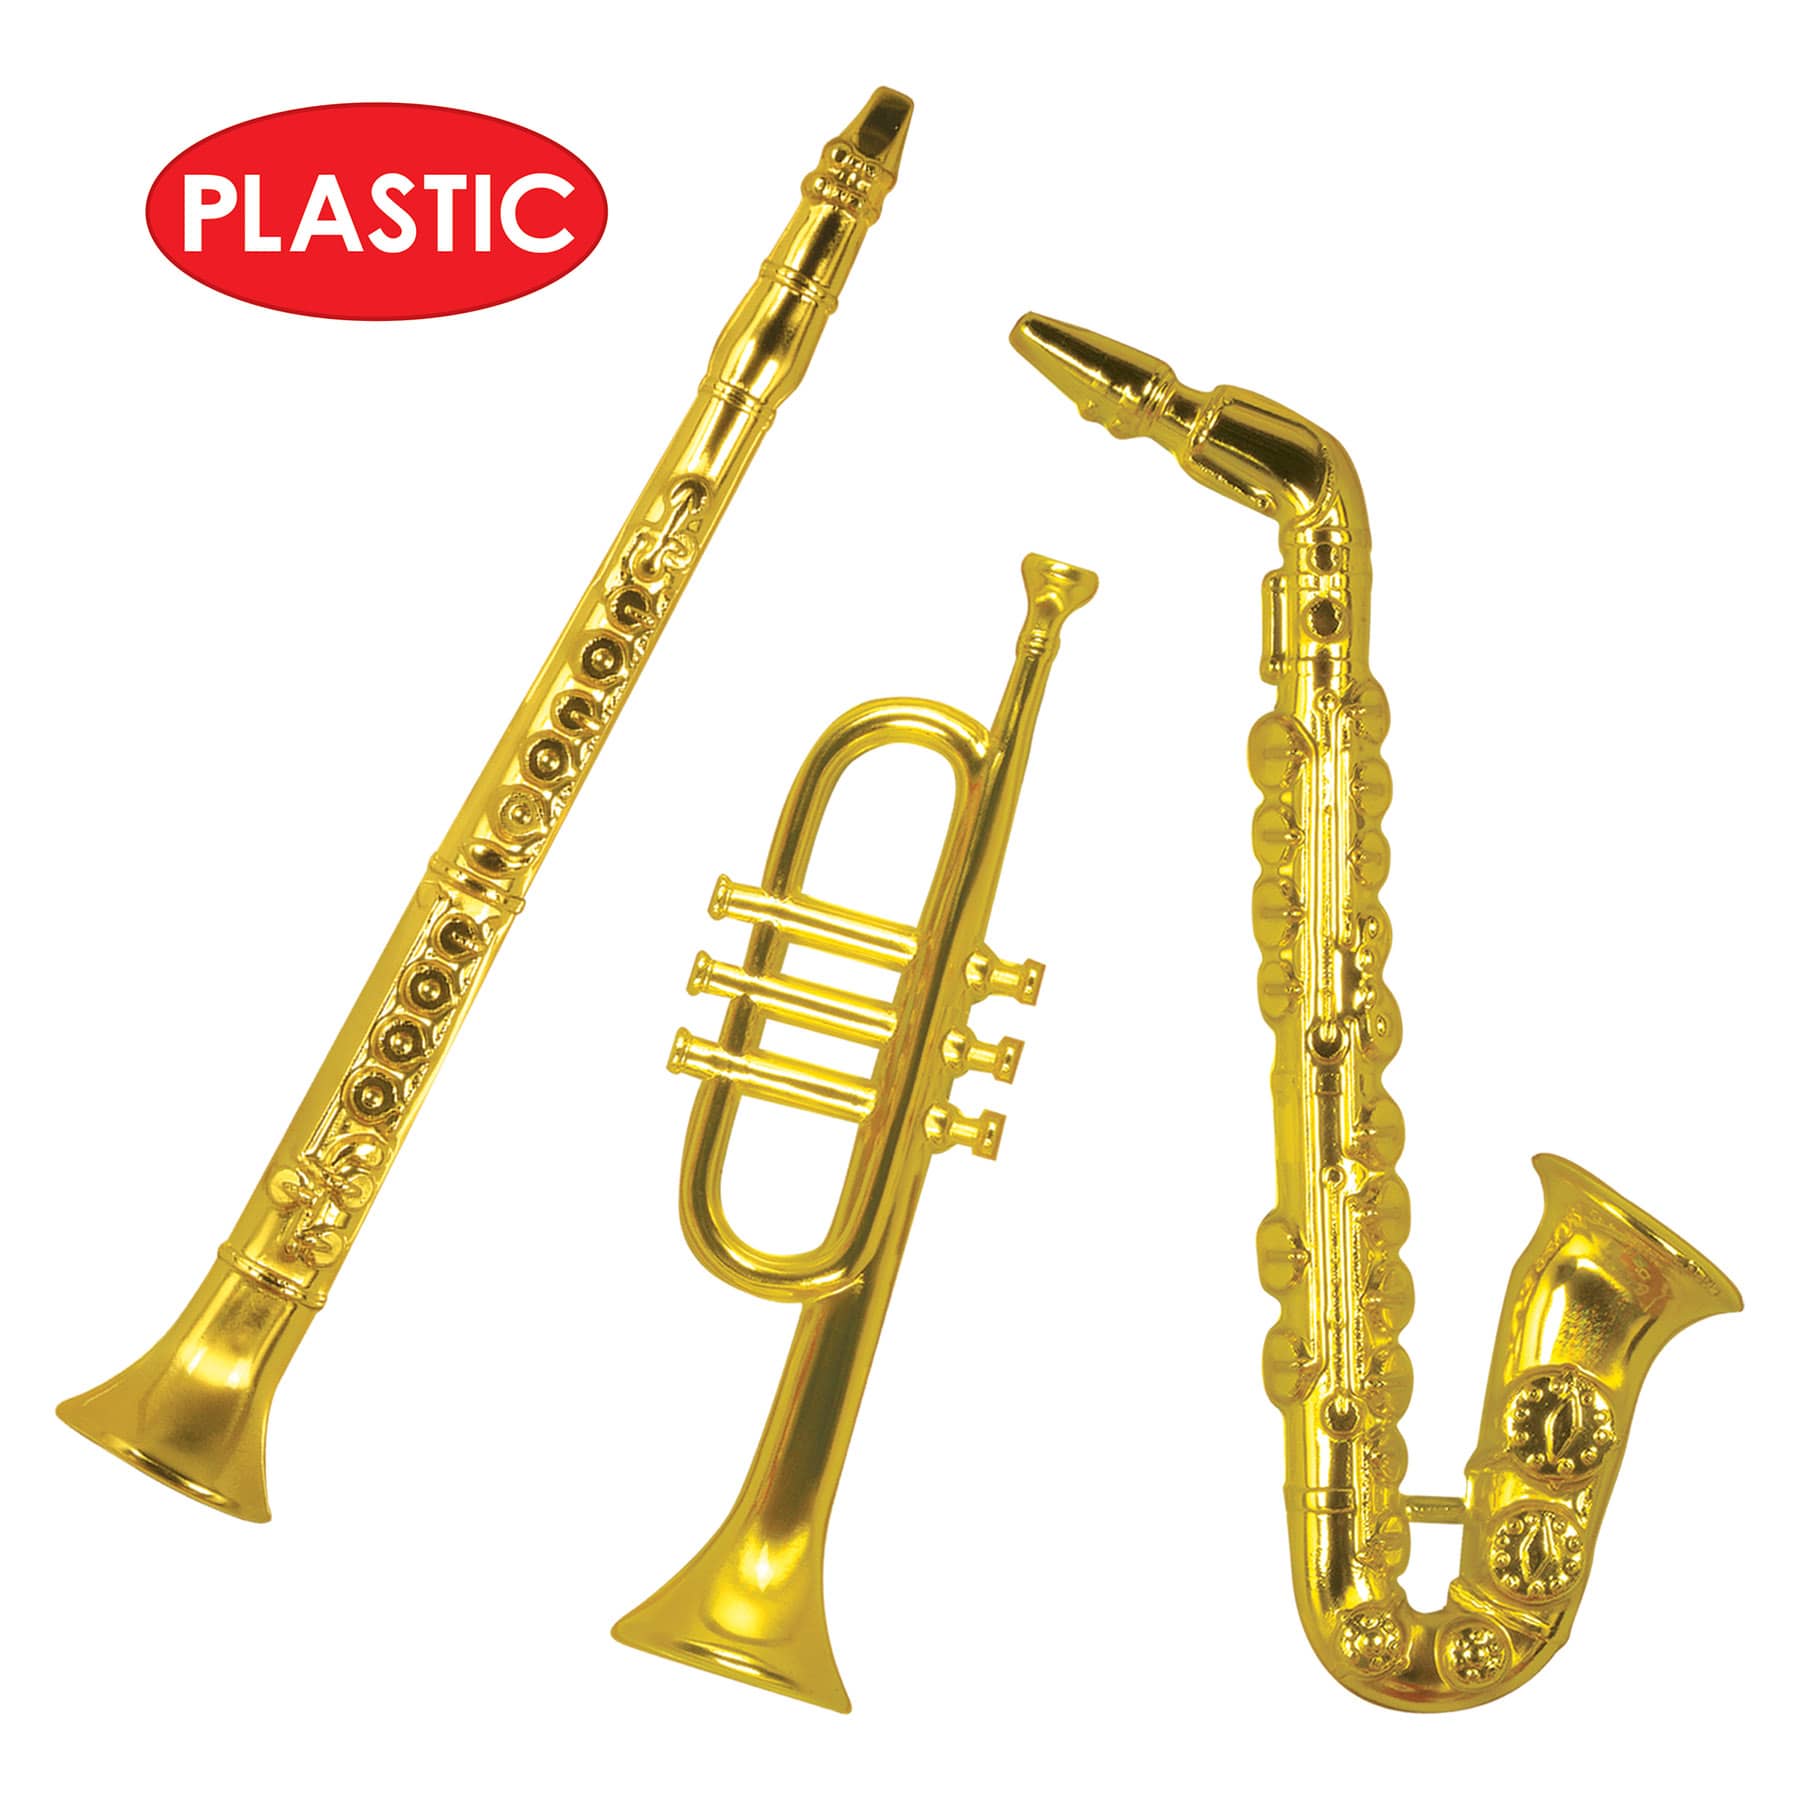 Gold Plastic Musical Instruments wall decorations 